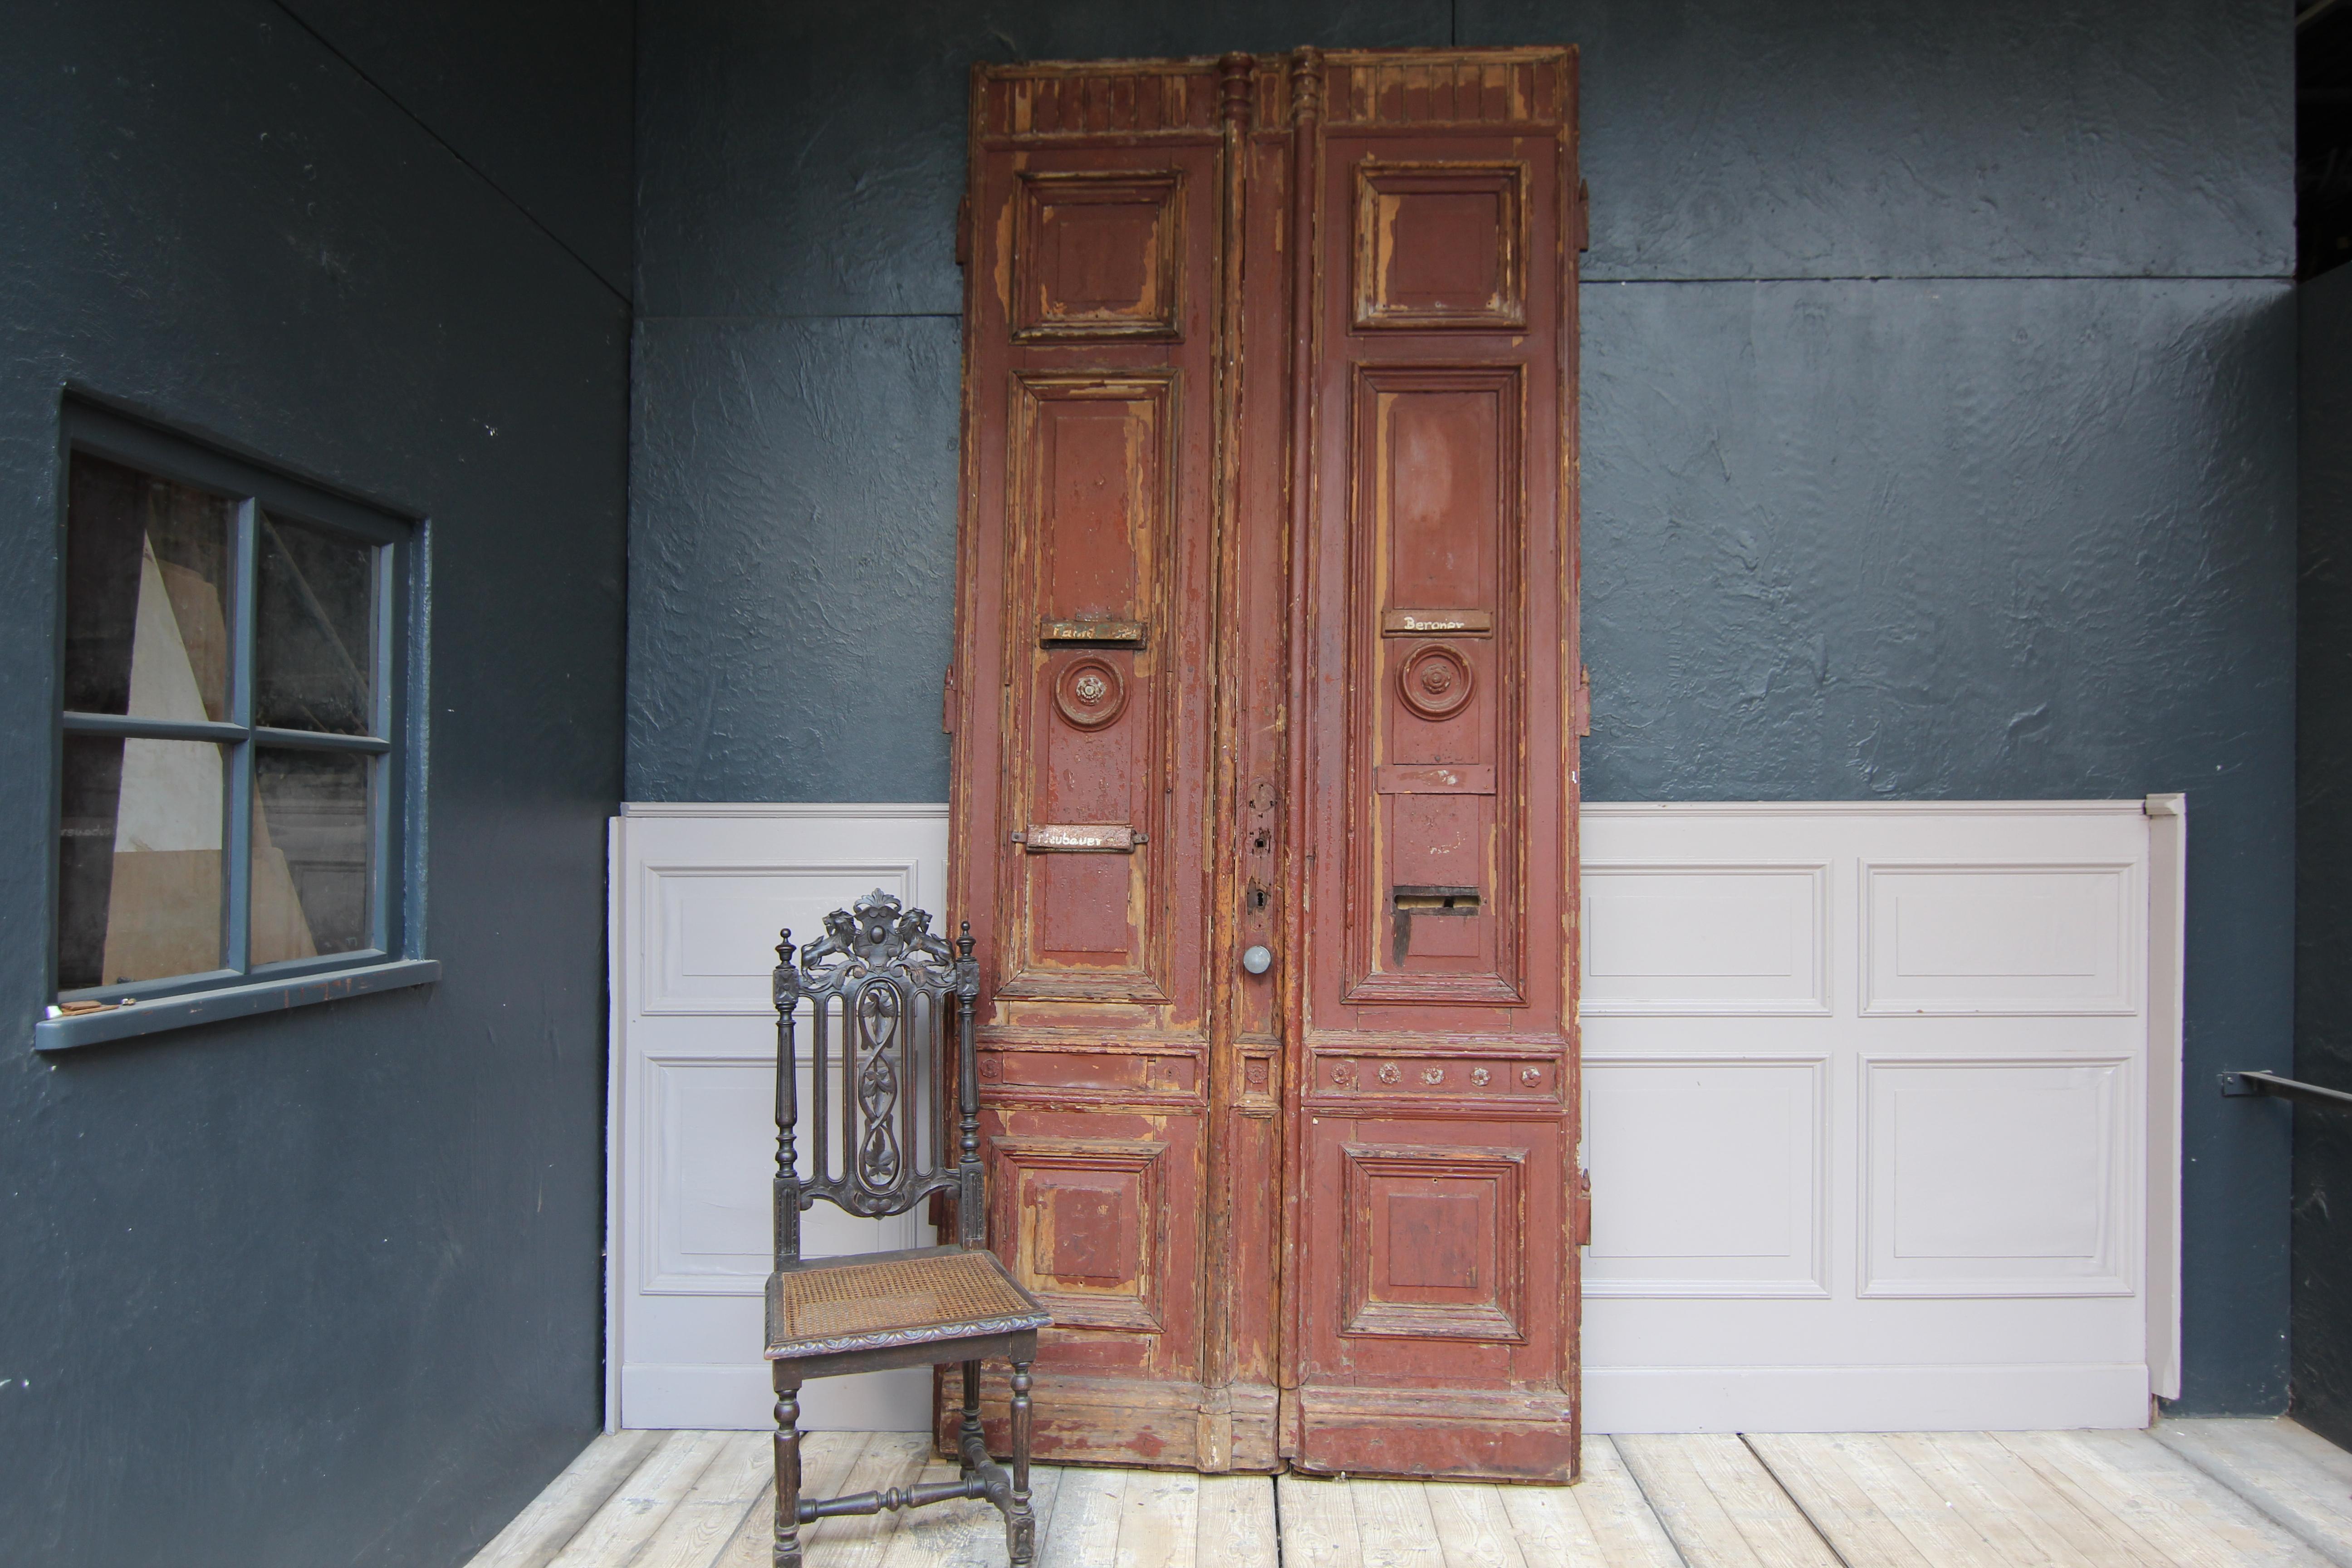 Large German double door in the original color with a beautiful patina from the late 19th century.

Very decorative unique piece in unrestored condition. 

Dimensions: 
285 cm high / 112.2 inch high,
126 cm (together) wide / 49.61 inch